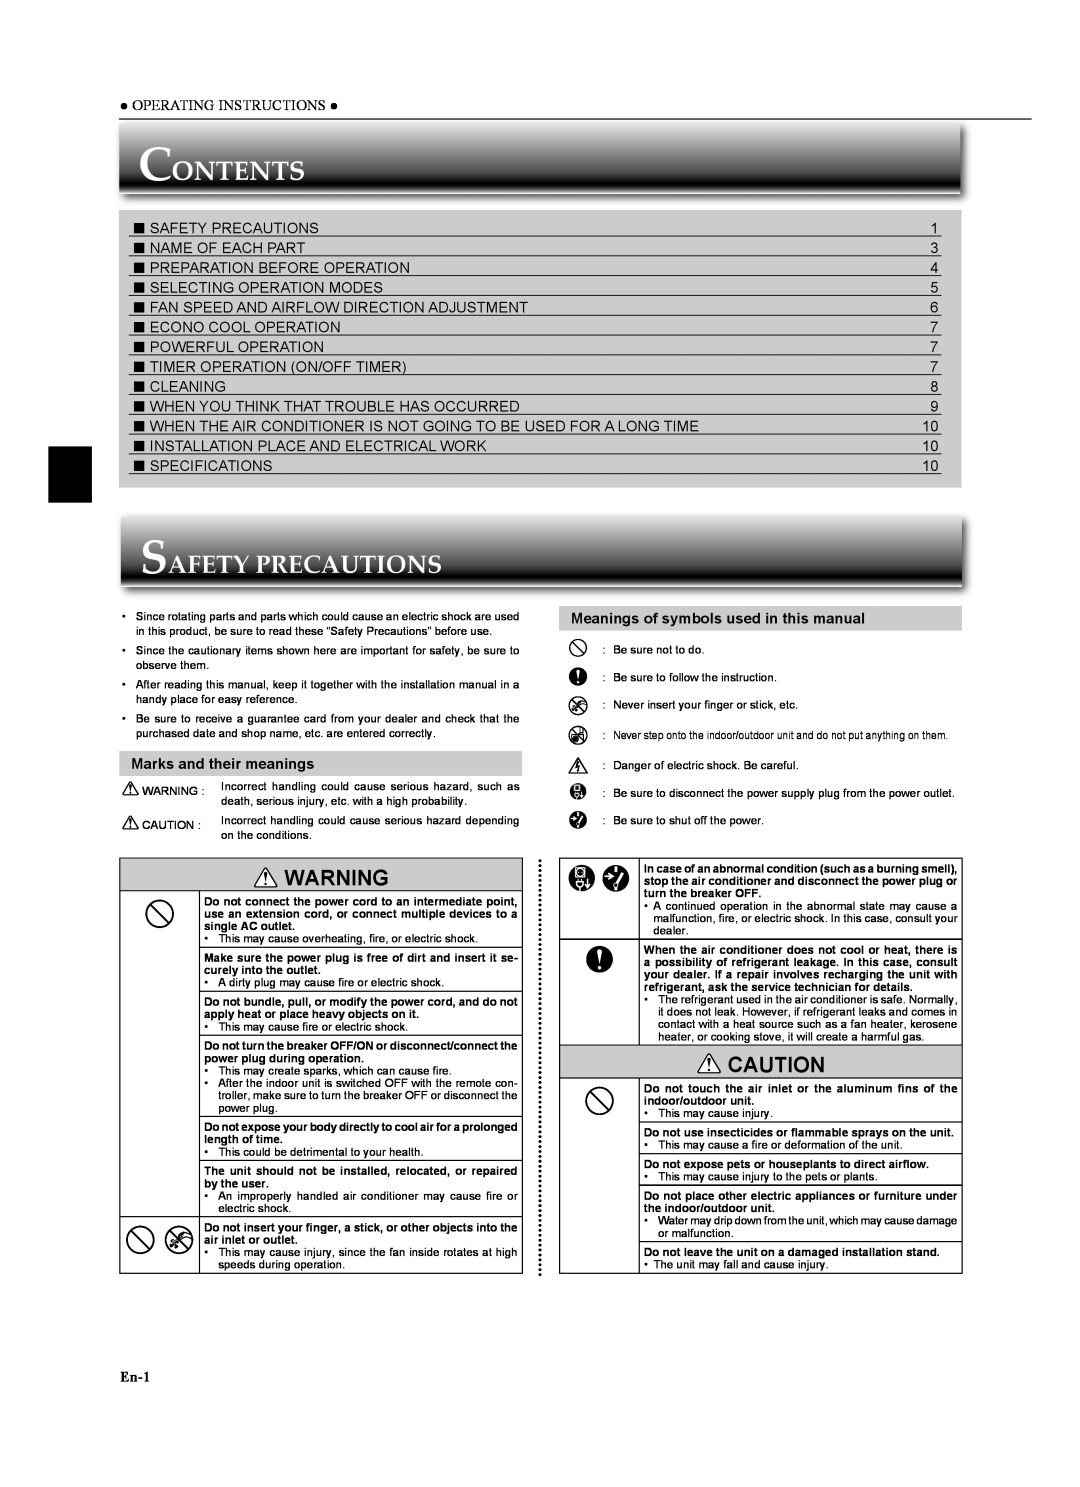 Mitsubishi Electronics MSZ-GA24NA operating instructions Contents, Safety Precautions, Marks and their meanings, En-1 